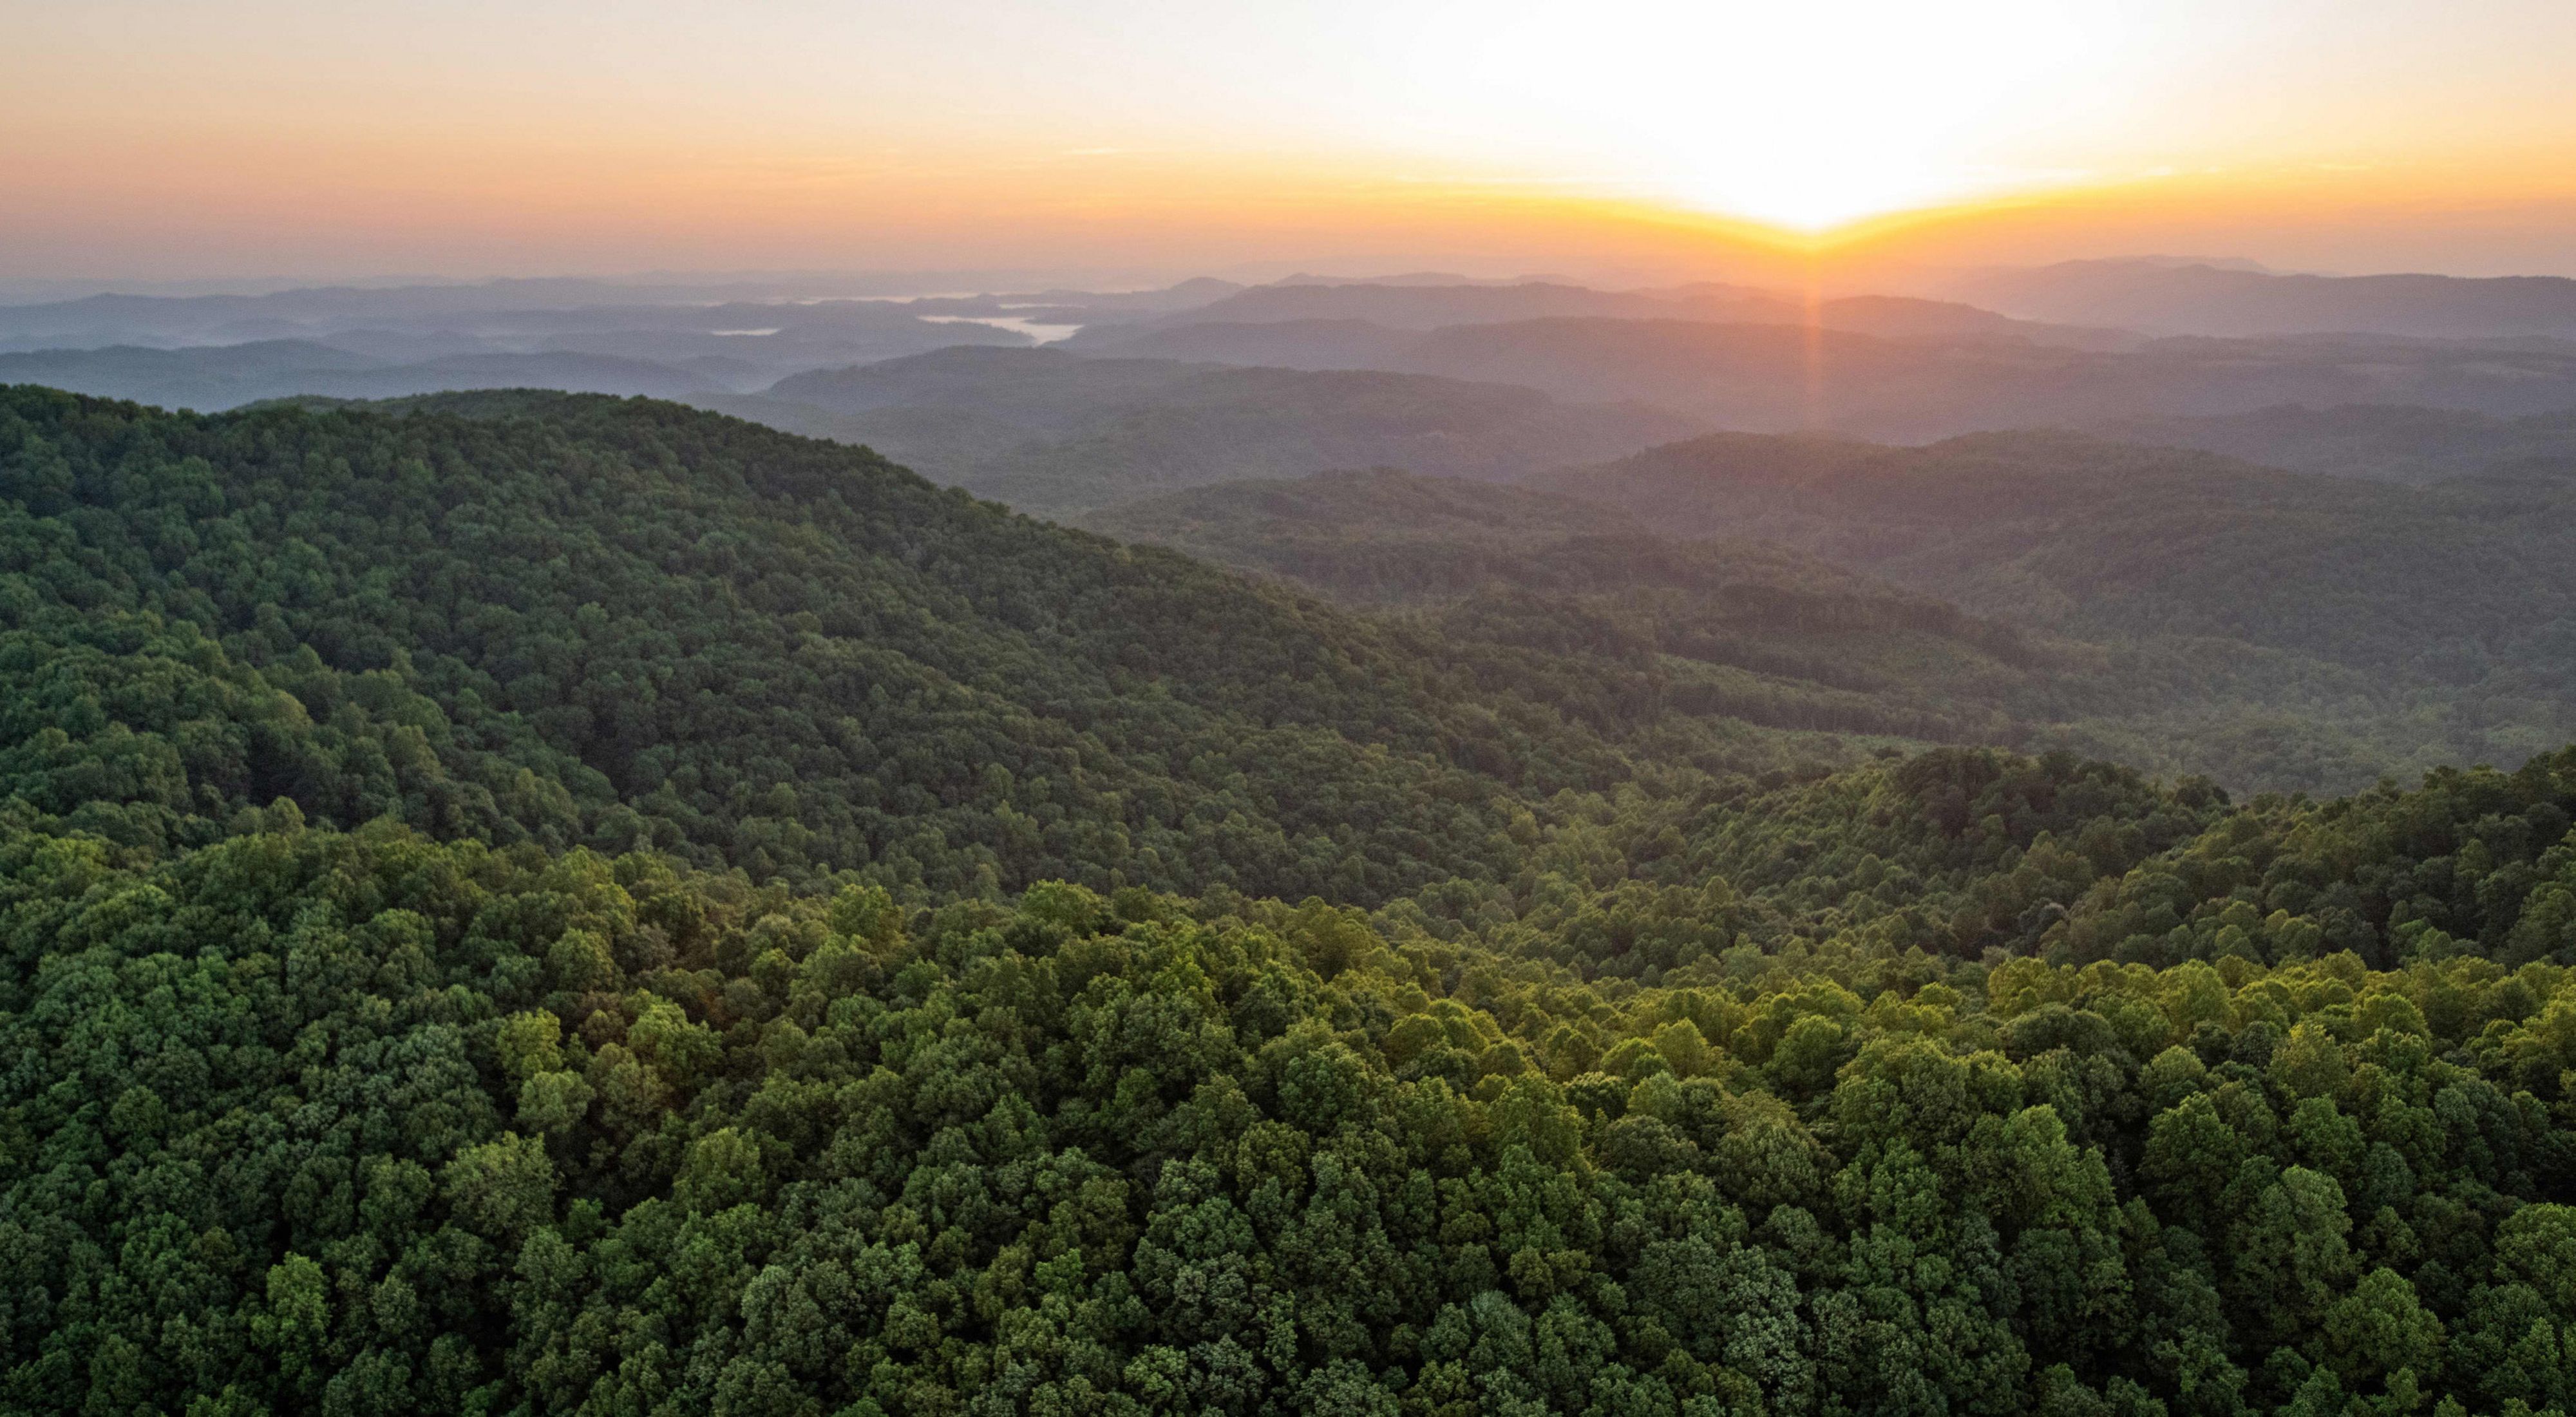 The sun rises over a forested mountain range. Rolling green ridges dominate the foreground and roll away to the horizon. White mist rises from the valleys in the distance.